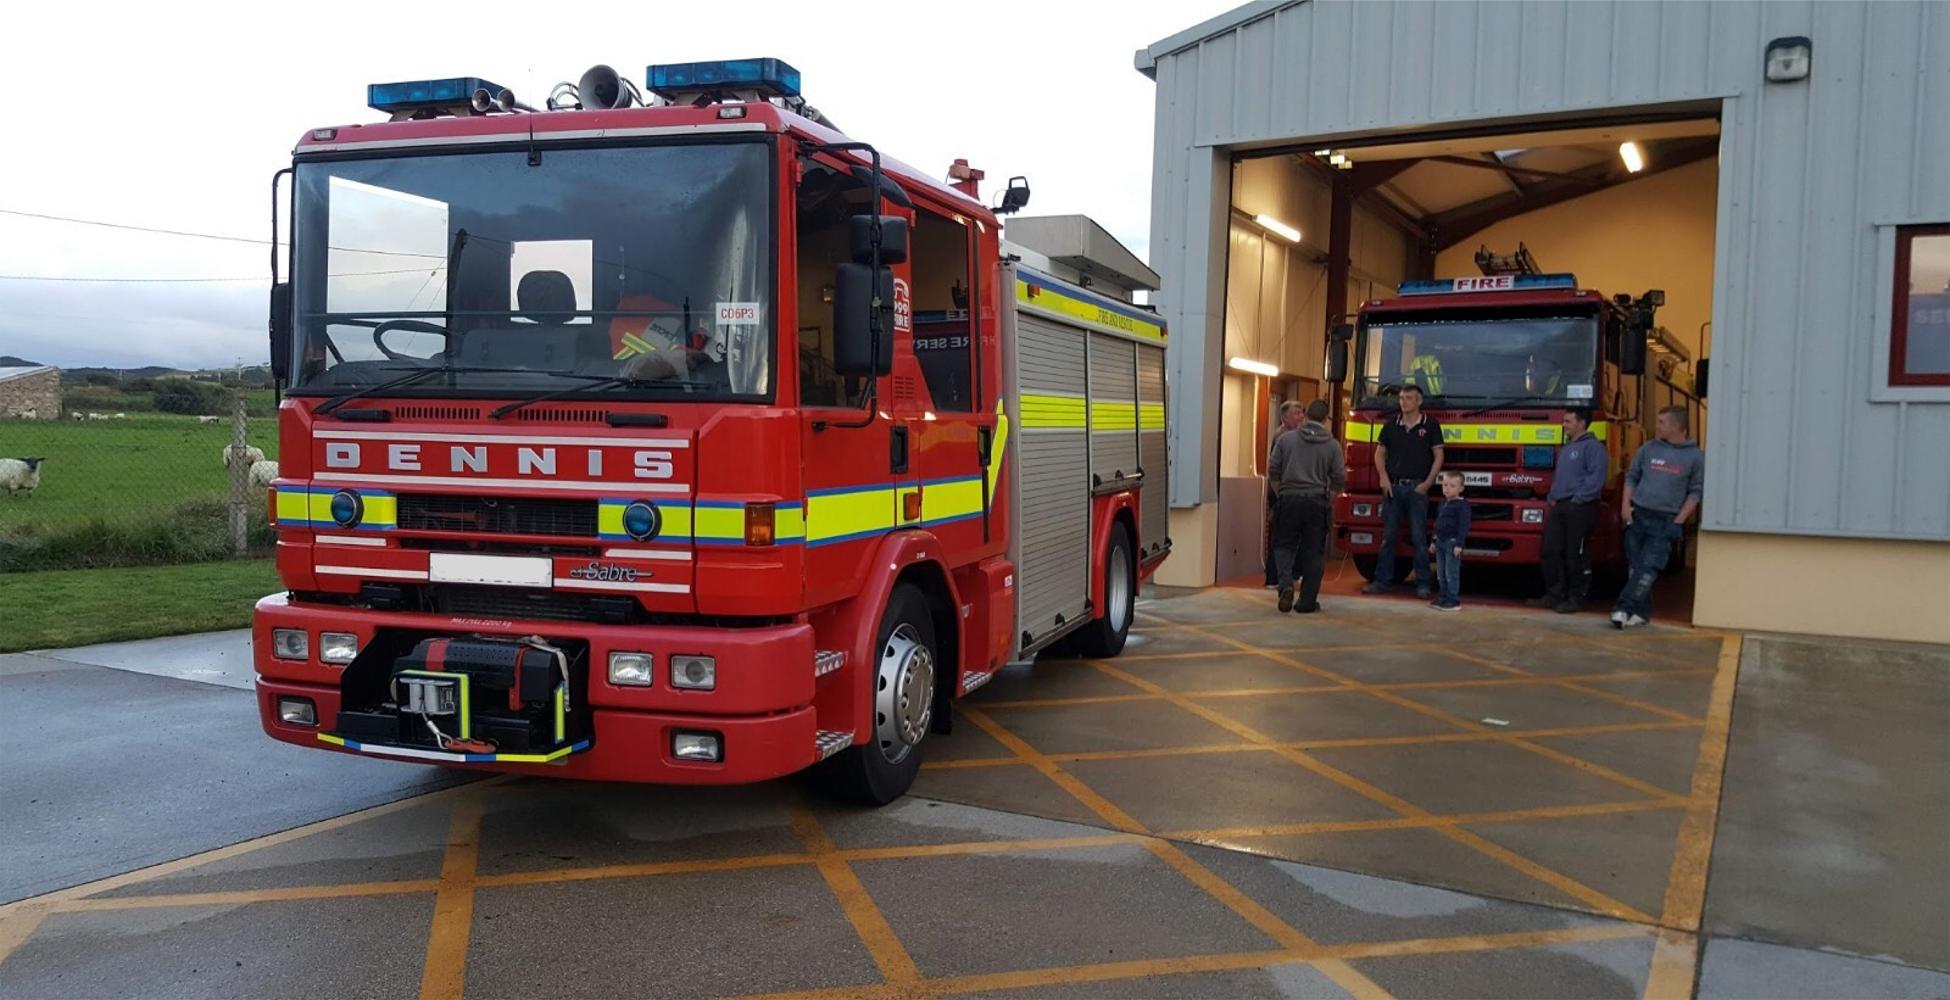 Dennis fire engine hire provided by Fire-Medics, Event Fire, Rescue & Emergency Medical Cover specialists, Belfast, Dublin, Donegal / Sligo providing an all Ireland service.